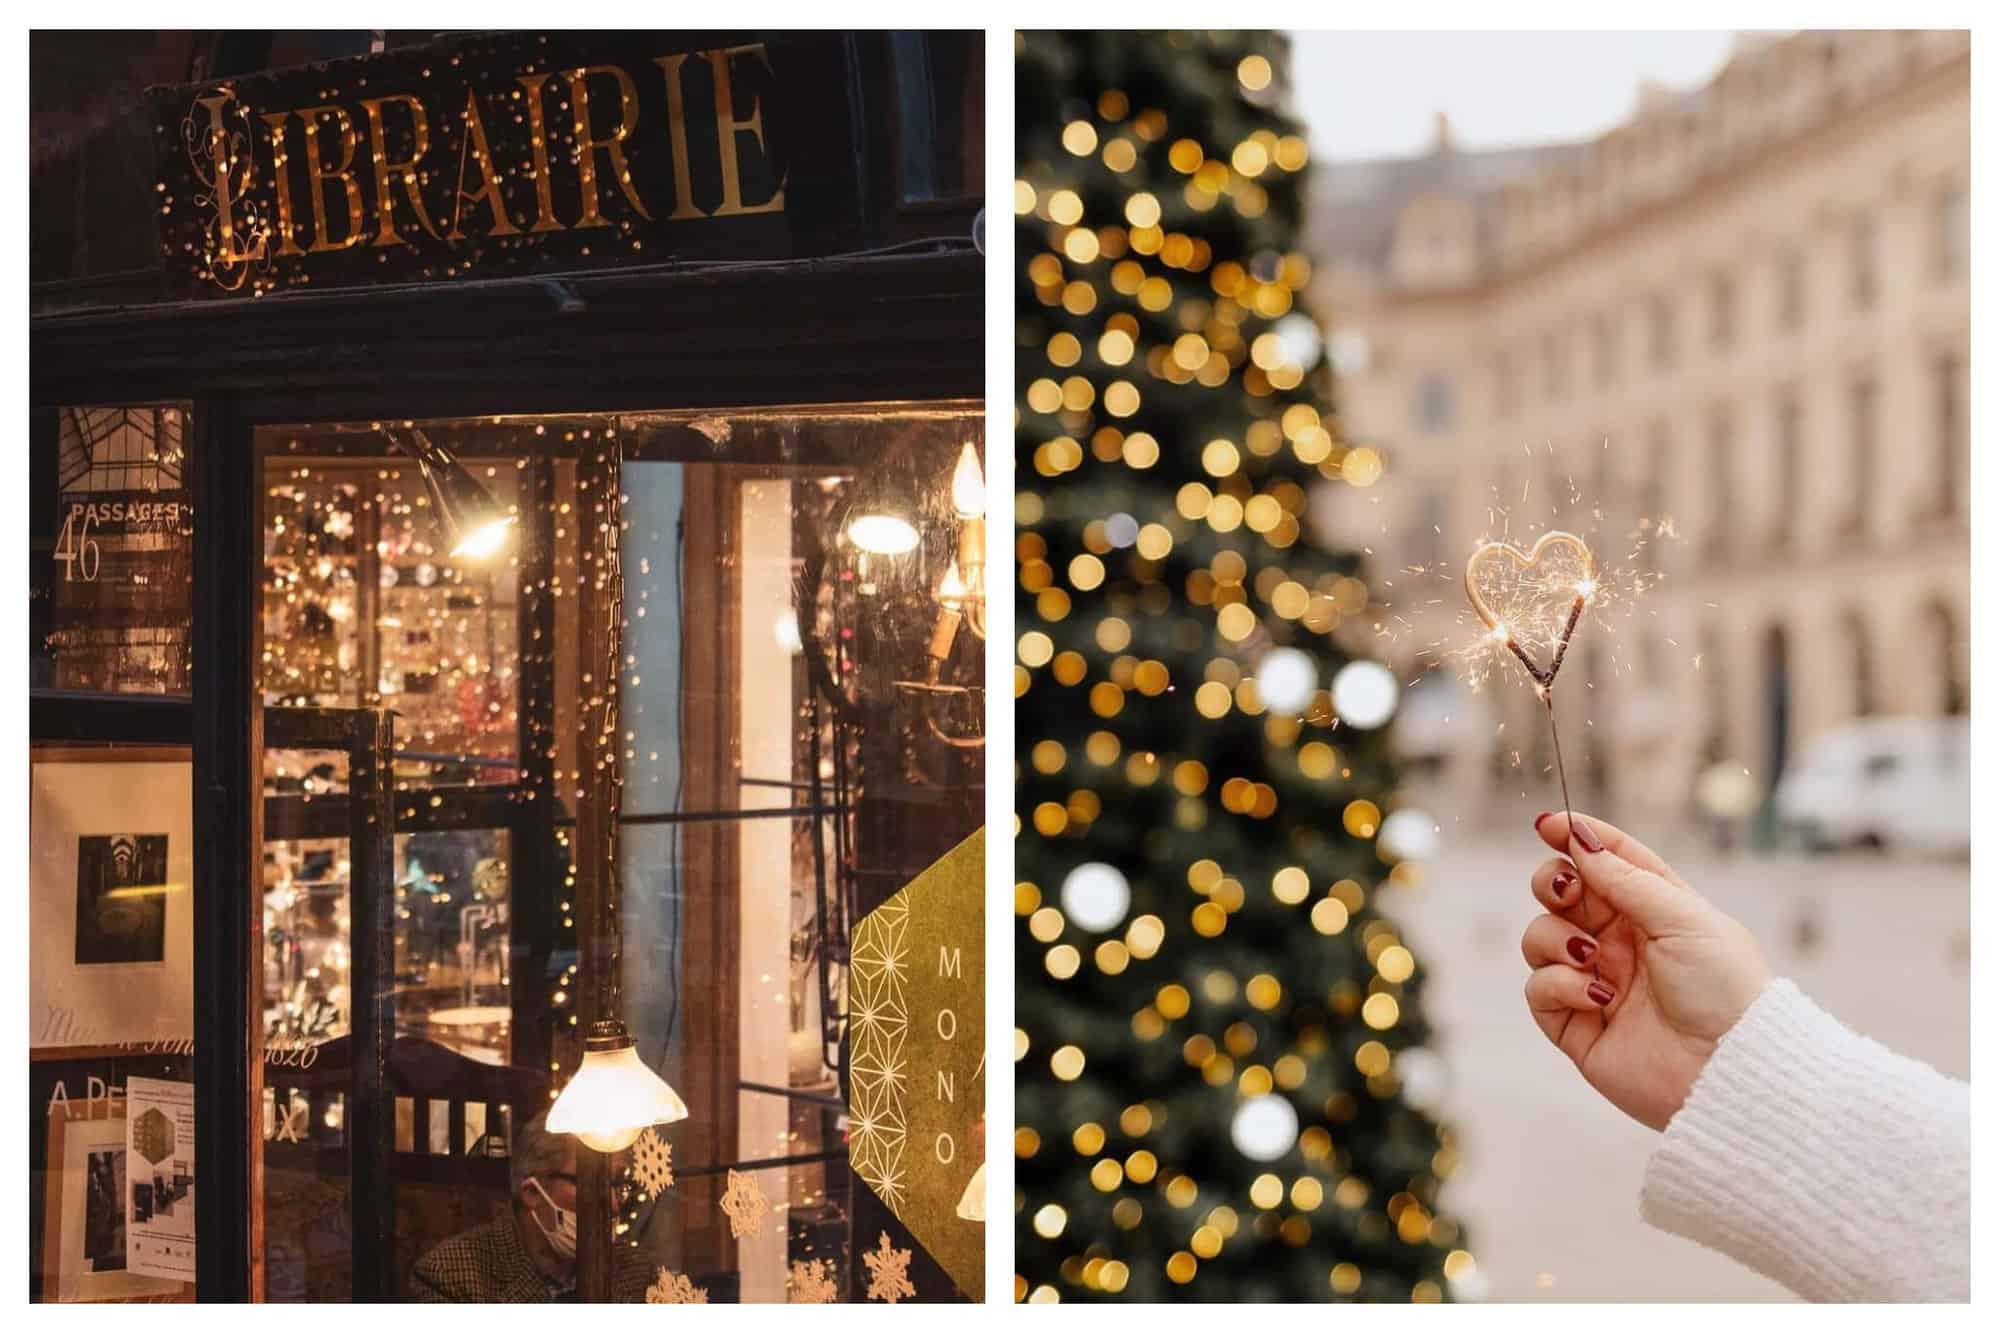 Left: the window of a bookstore in Paris with Christmas lights. The storefront is black and the word "Librarie" is written in gold on it. The shop is lit up with lights. Right: Someone holding a heart-shaped sparkler in front of a Christmas tree in Paris. The hand with the sparkler is in focus and the tree and some Parisian buildings are blurry in the background.